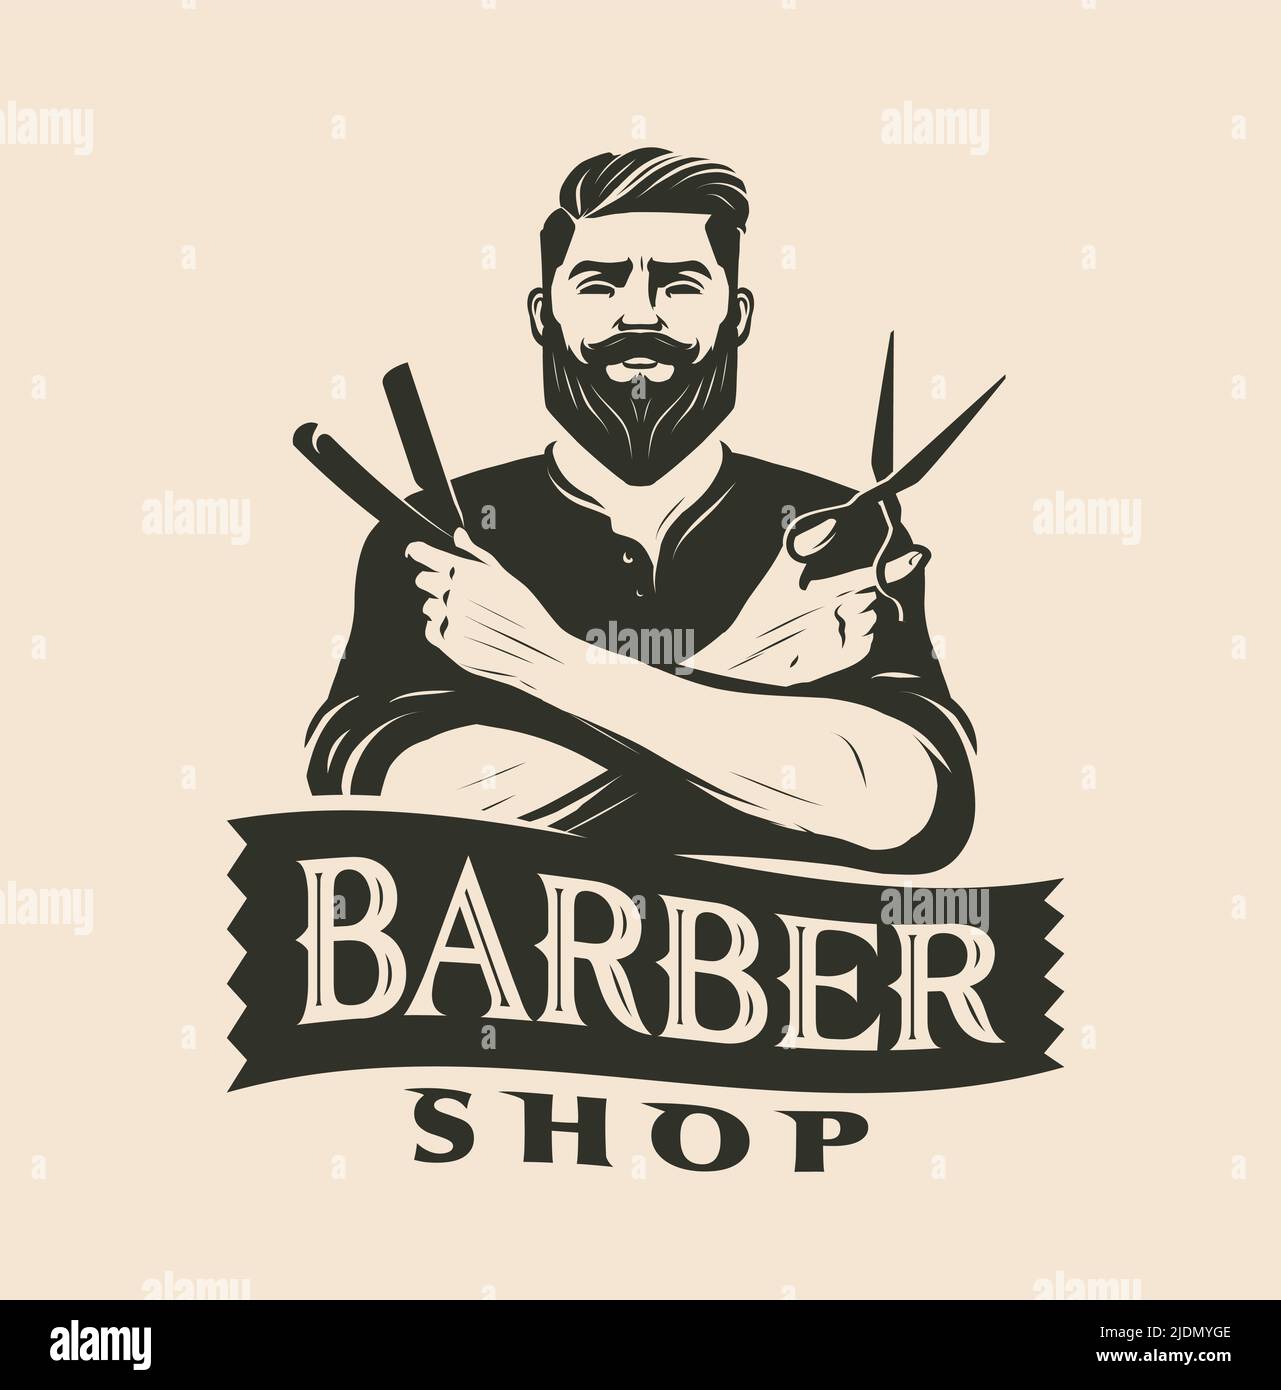 Barbershop logo vintage. Beard or mustache shave and haircut. Male beauty vector illustration Stock Vector